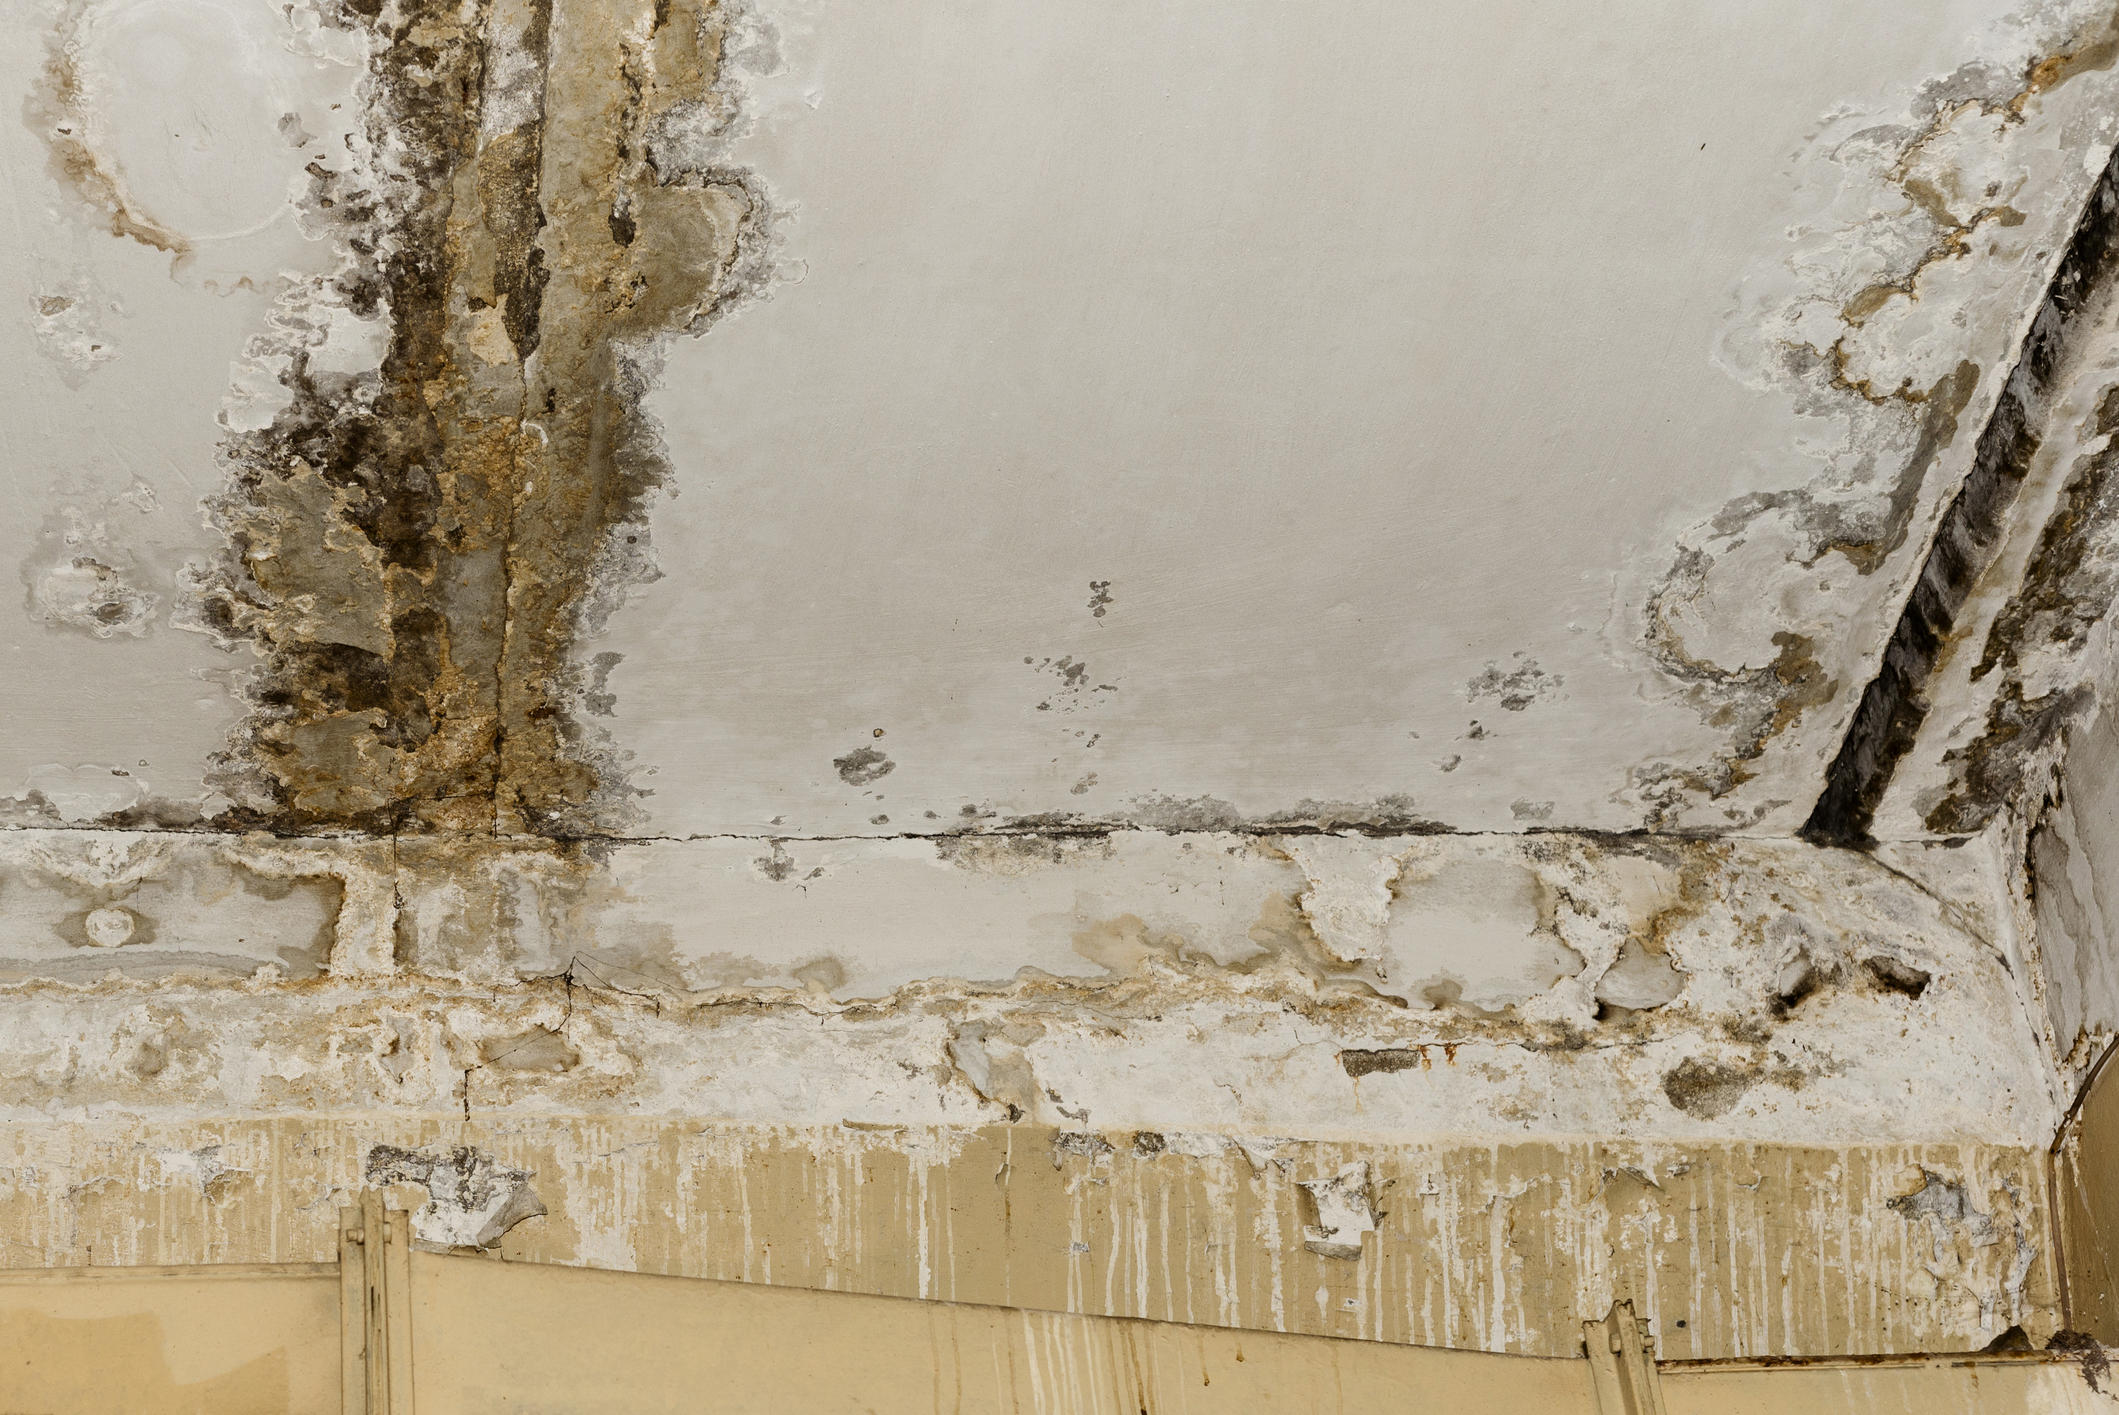 Do you require mold remediation services? Top Tier Restoration & Remodeling offers complete inspection and assessment, and we then can begin the process of removal of any mold growth resulting from your water damage. This may involve containment, proper disposal of contaminated materials, and thorough cleaning and disinfection of affected areas to prevent mold recurrence.